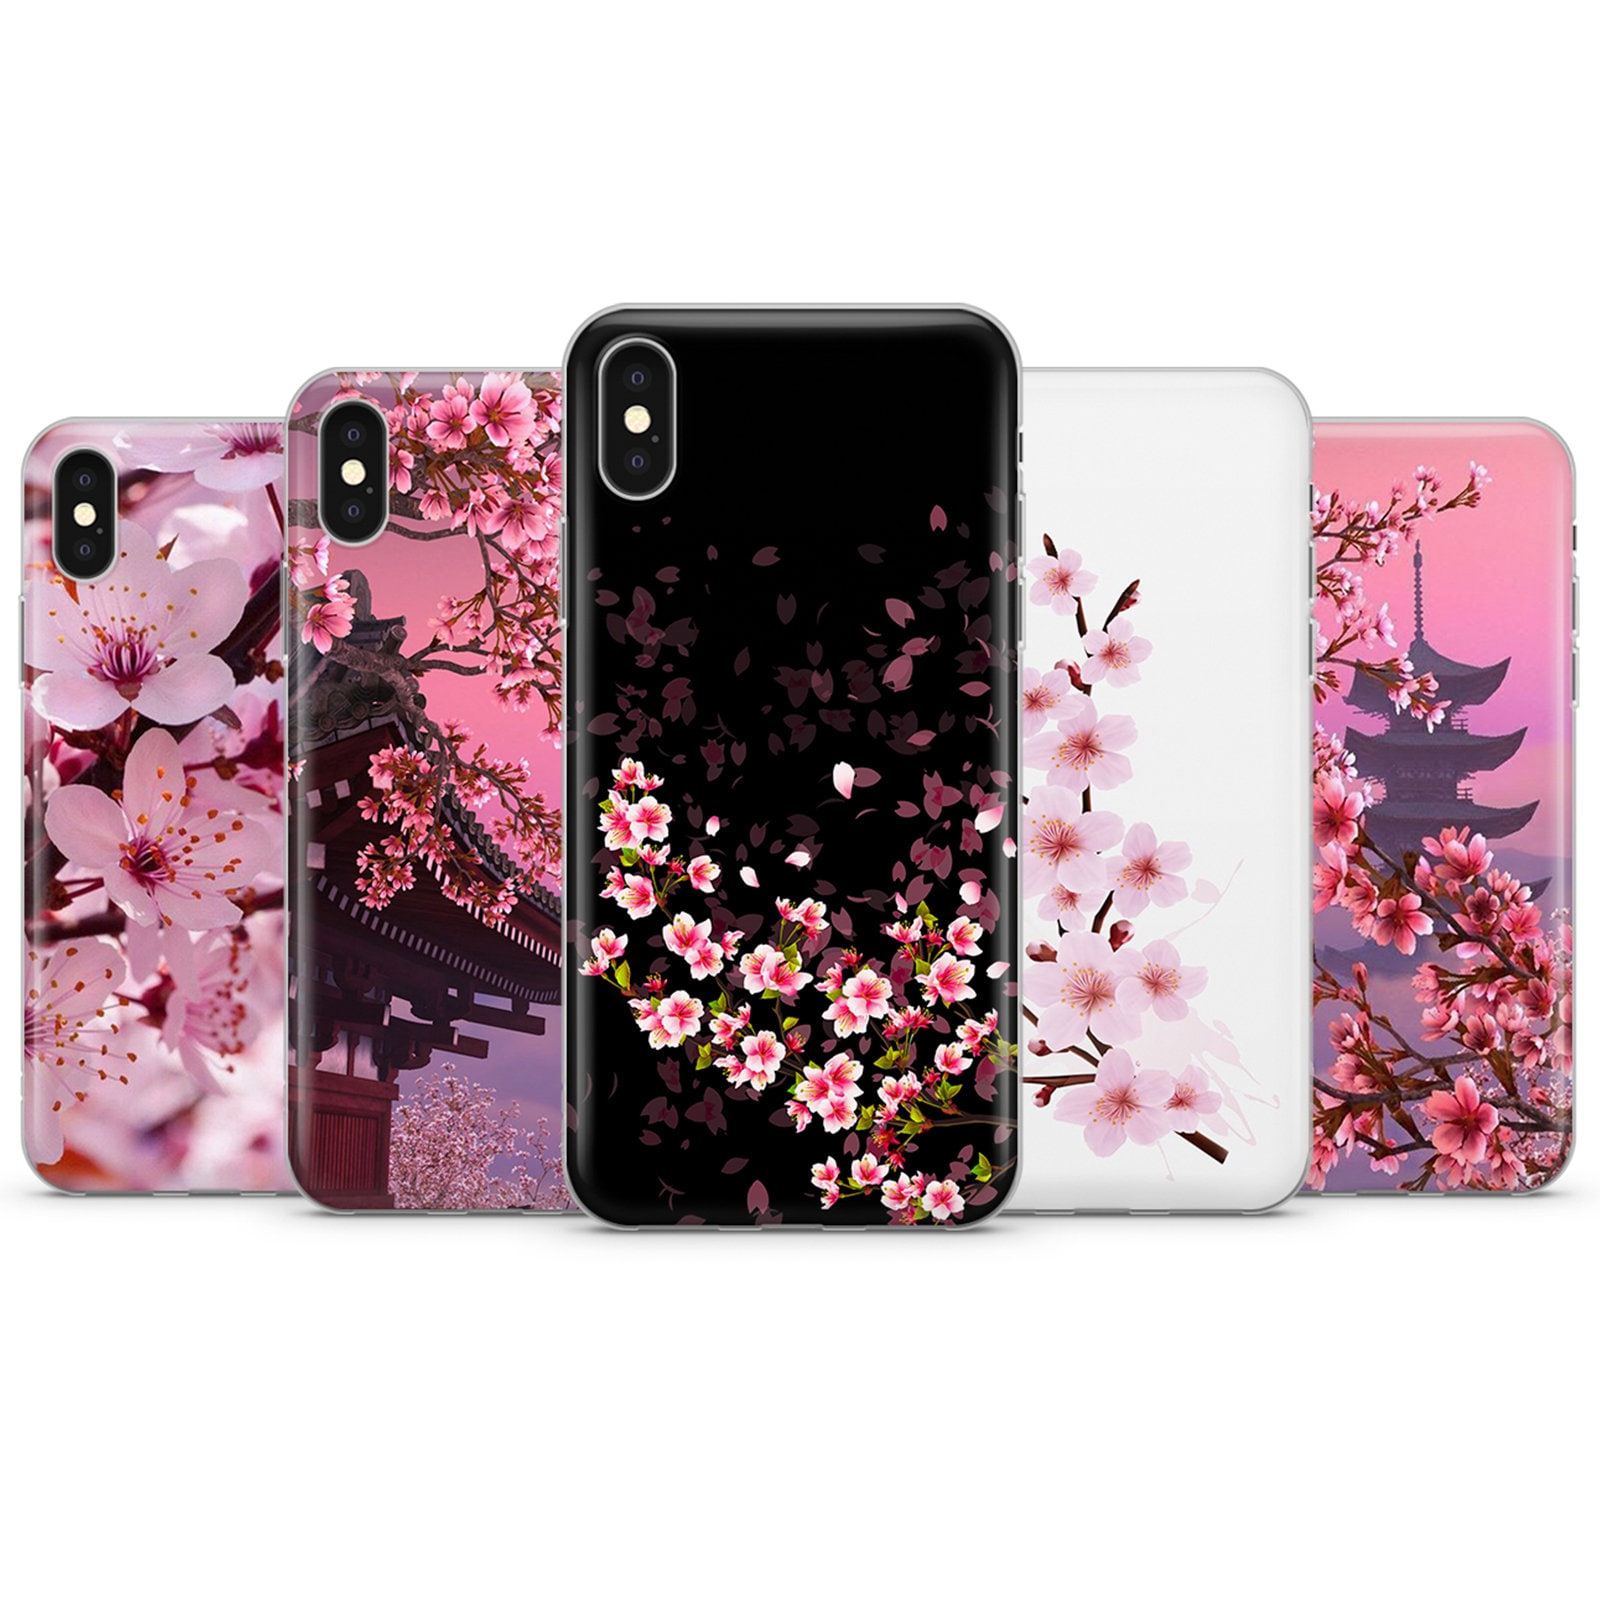 Cherry Blossoms (illustration) iPhone Wallet Case by applebeat